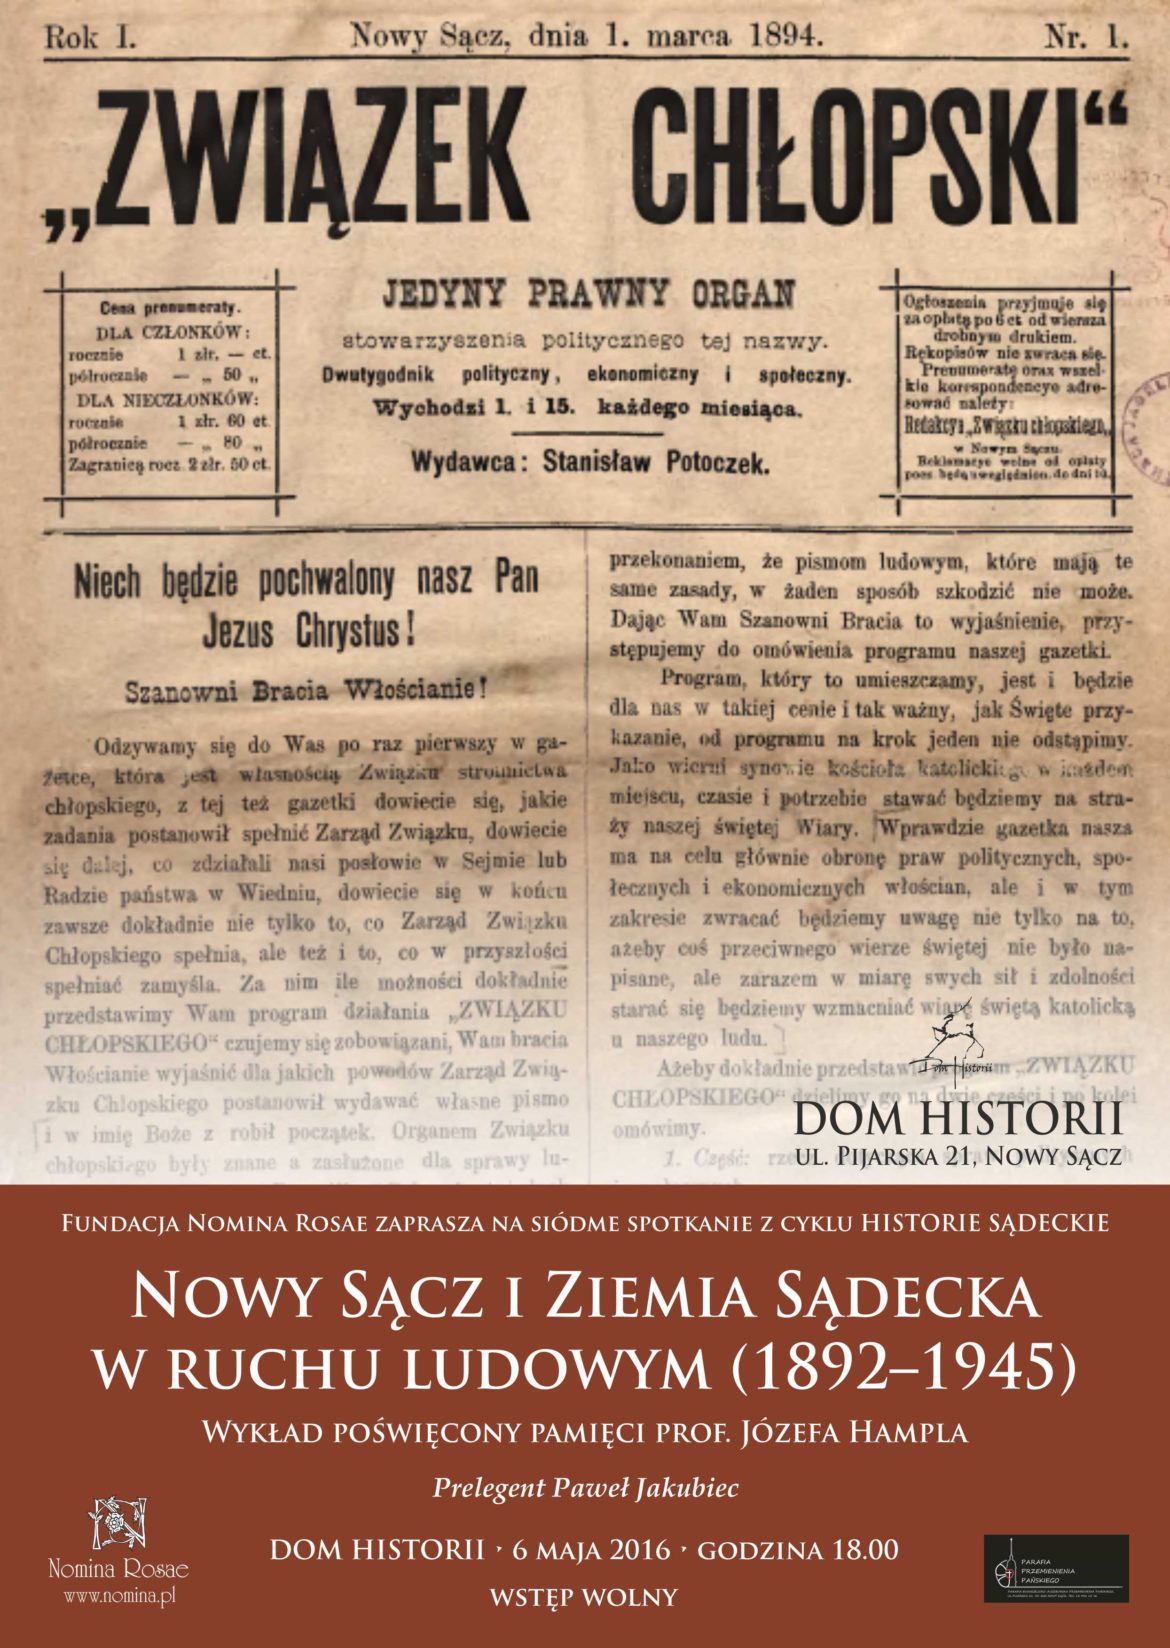 Historie Sądeckie ruch Ludowy plakat